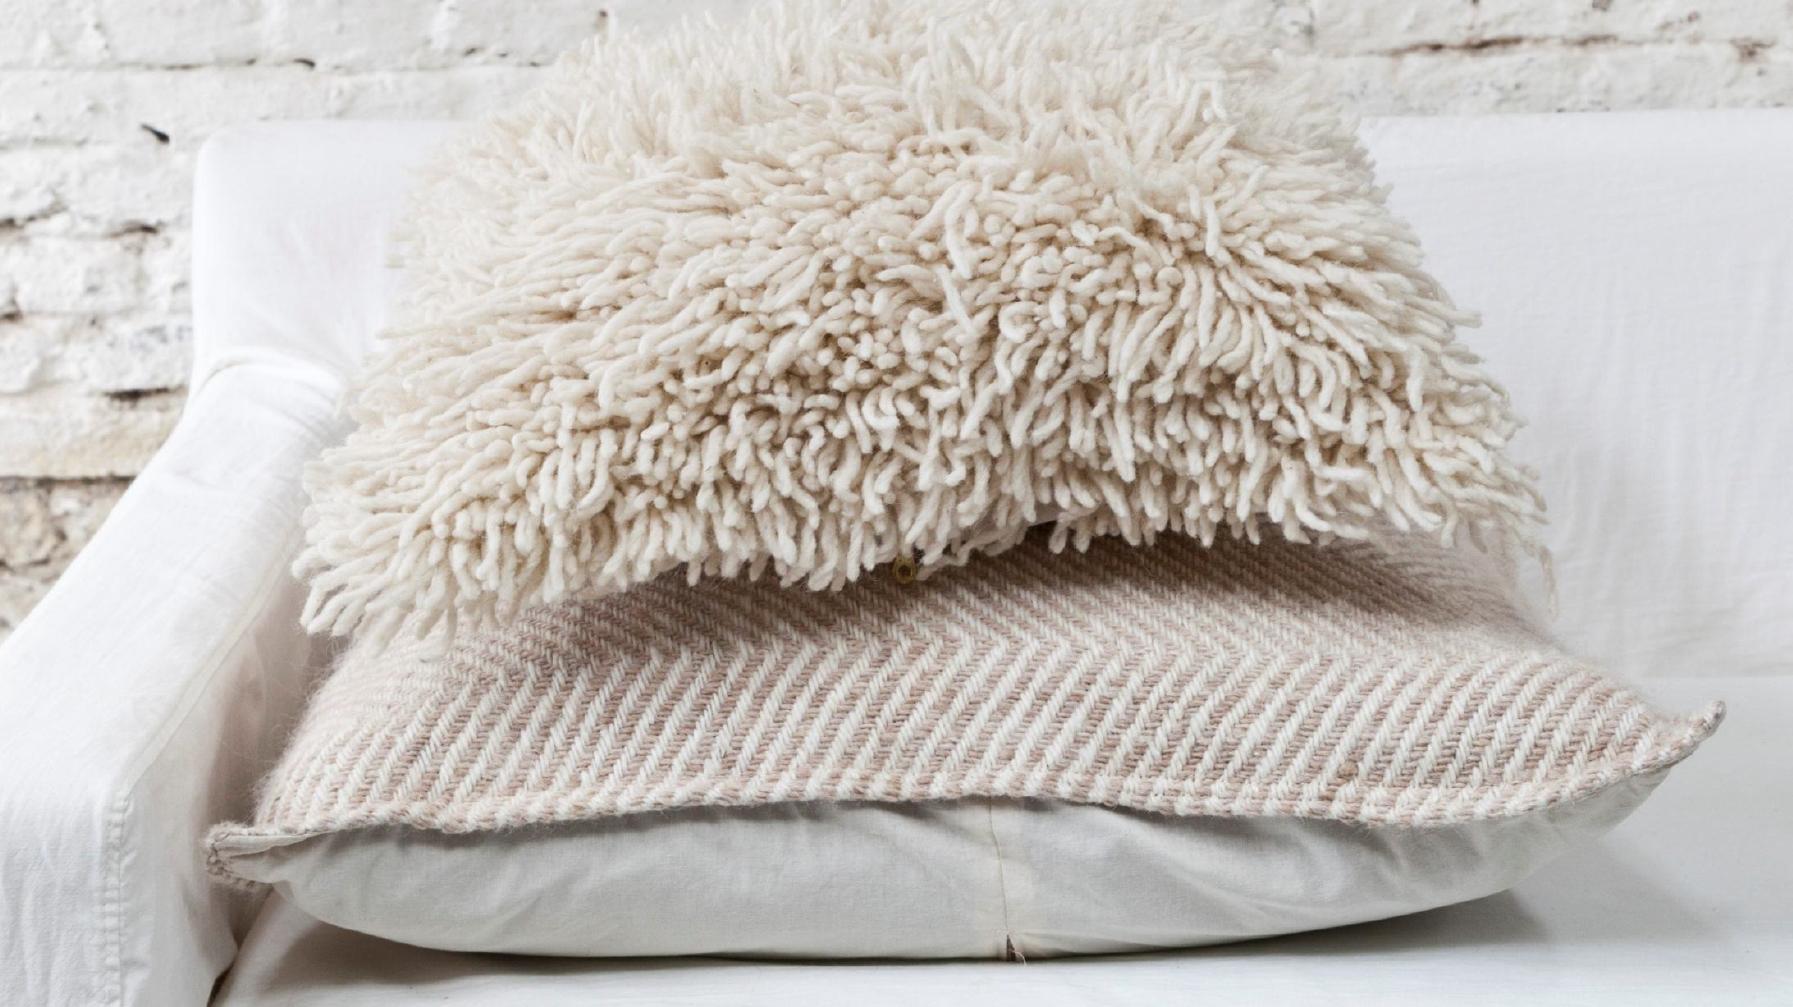 This fantastic Sur style throw pillow is made from hand spun virgin sheep wool, woven by hand by master weavers who live in the remote area of La Puna, Argentina, using ancestral techniques. The entire process from shearing to final finish is done